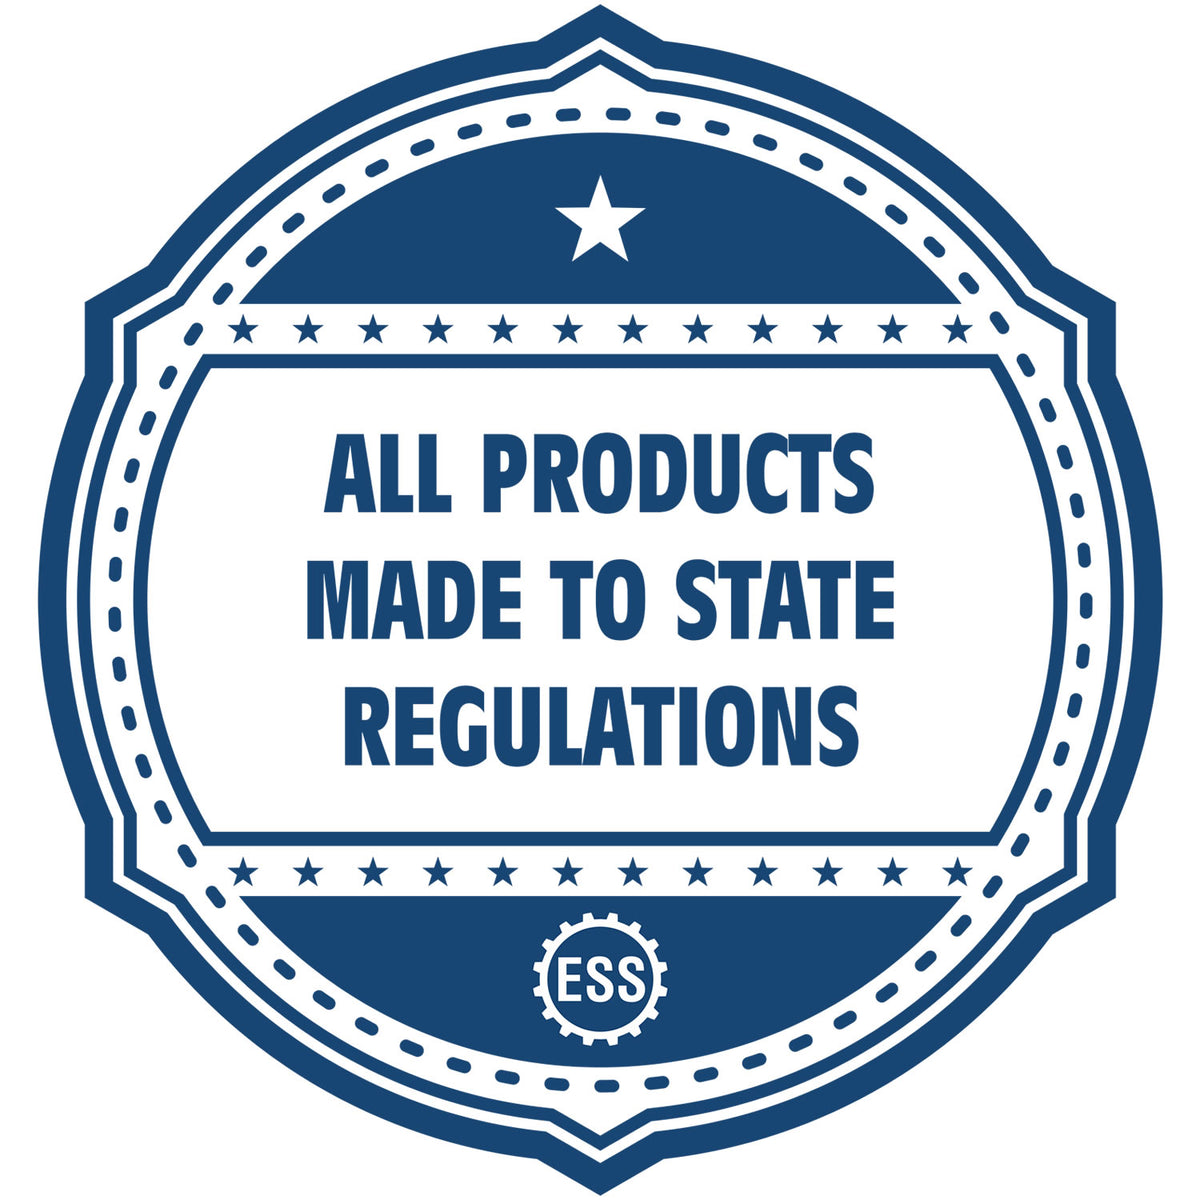 An icon or badge element for the North Dakota Engineer Desk Seal showing that this product is made in compliance with state regulations.